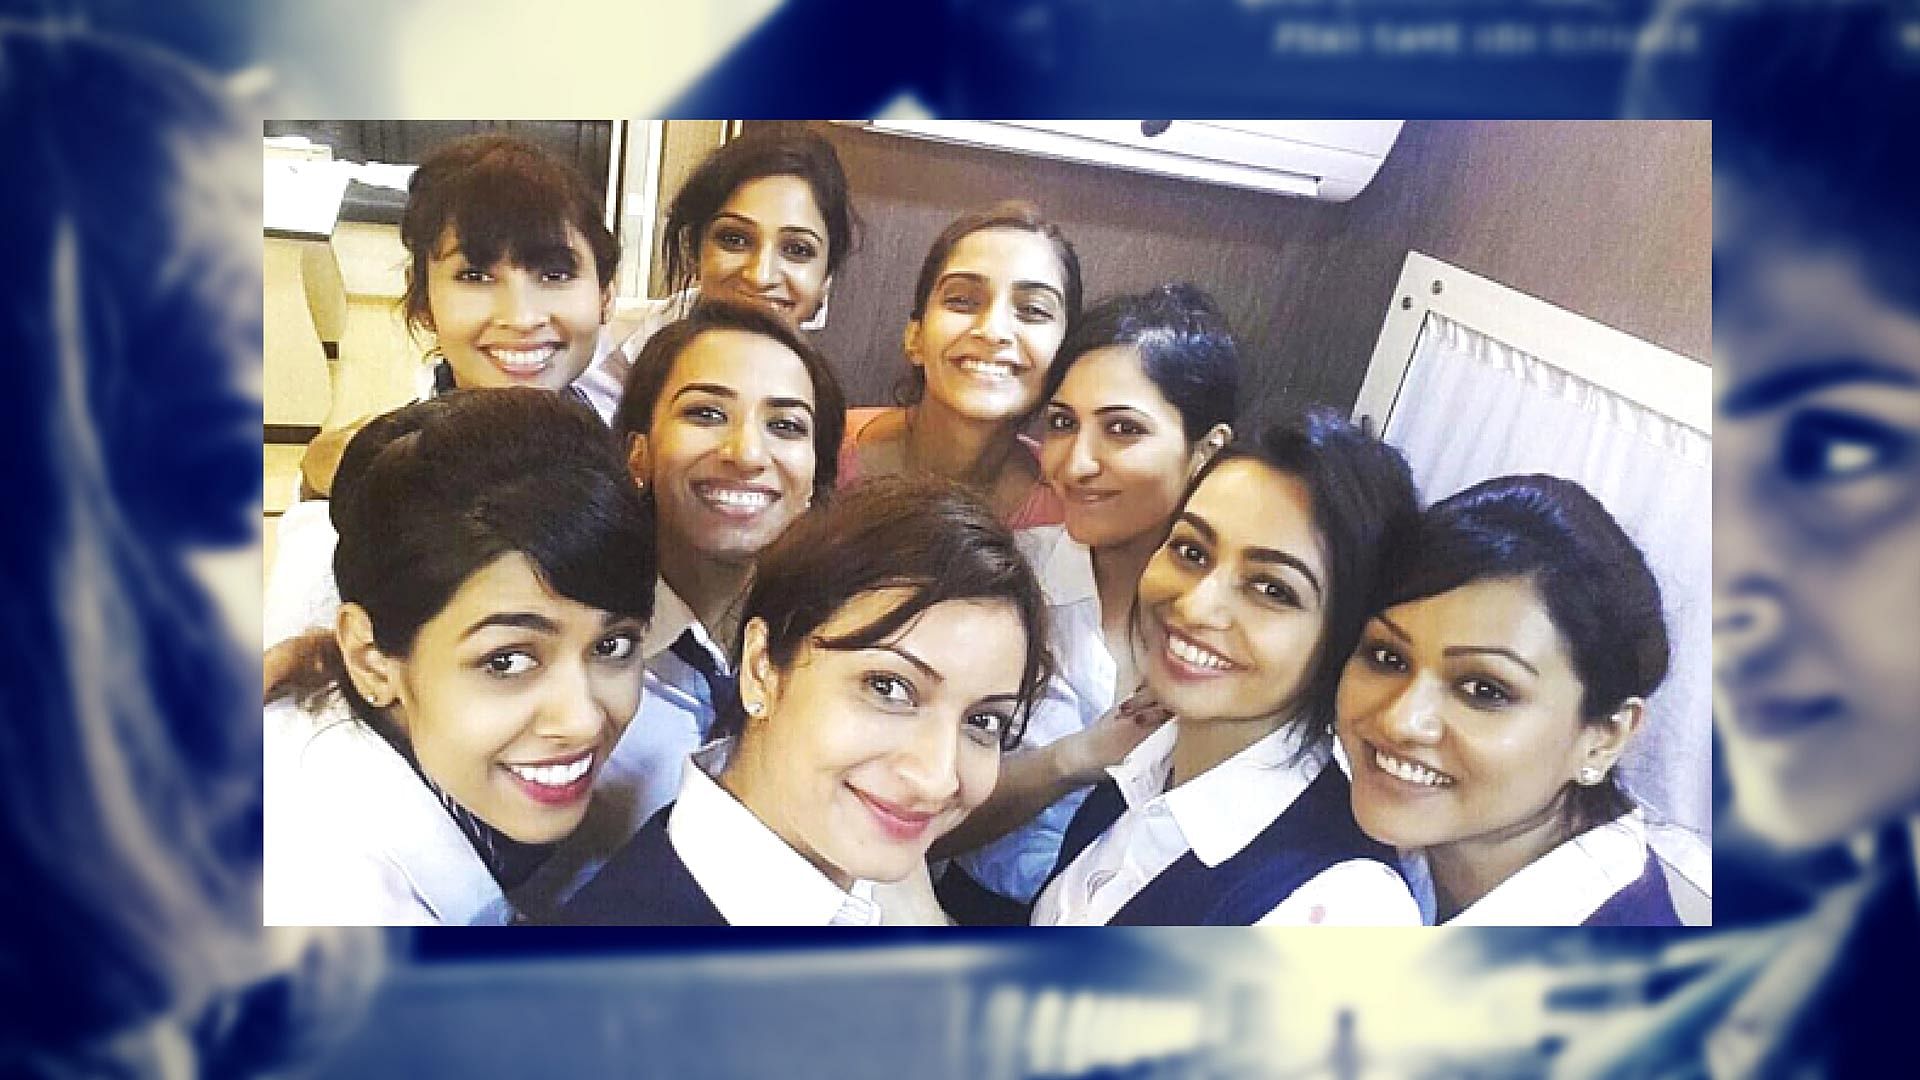 Aishwarya Subramaniam (Sonam’s right) with Sonam Kapoor and the actors who play flight attendants in Neerja. (Photo Courtesy: <a href="https://www.instagram.com/sonamkapoor/">Sonam Kapoor’s instagram</a>)